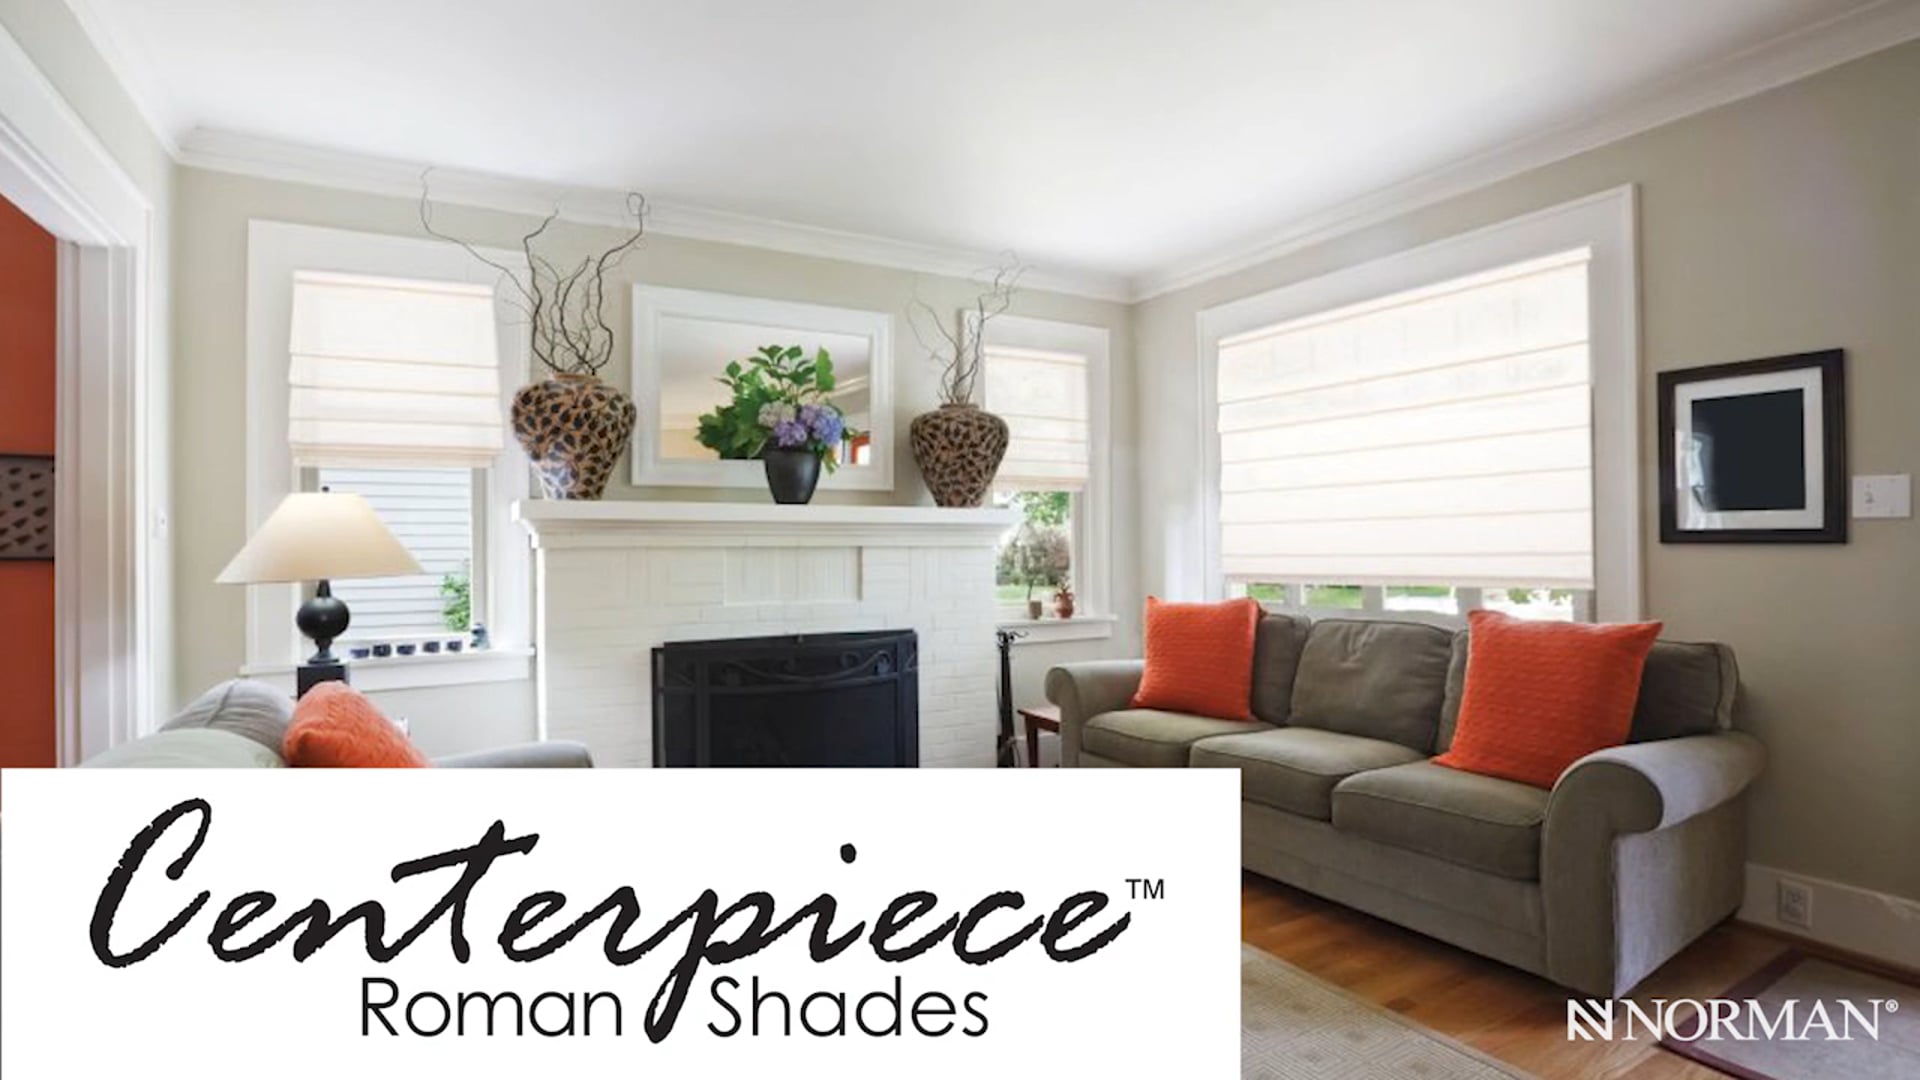 Centerpiece™ Roman Shades from Norman®